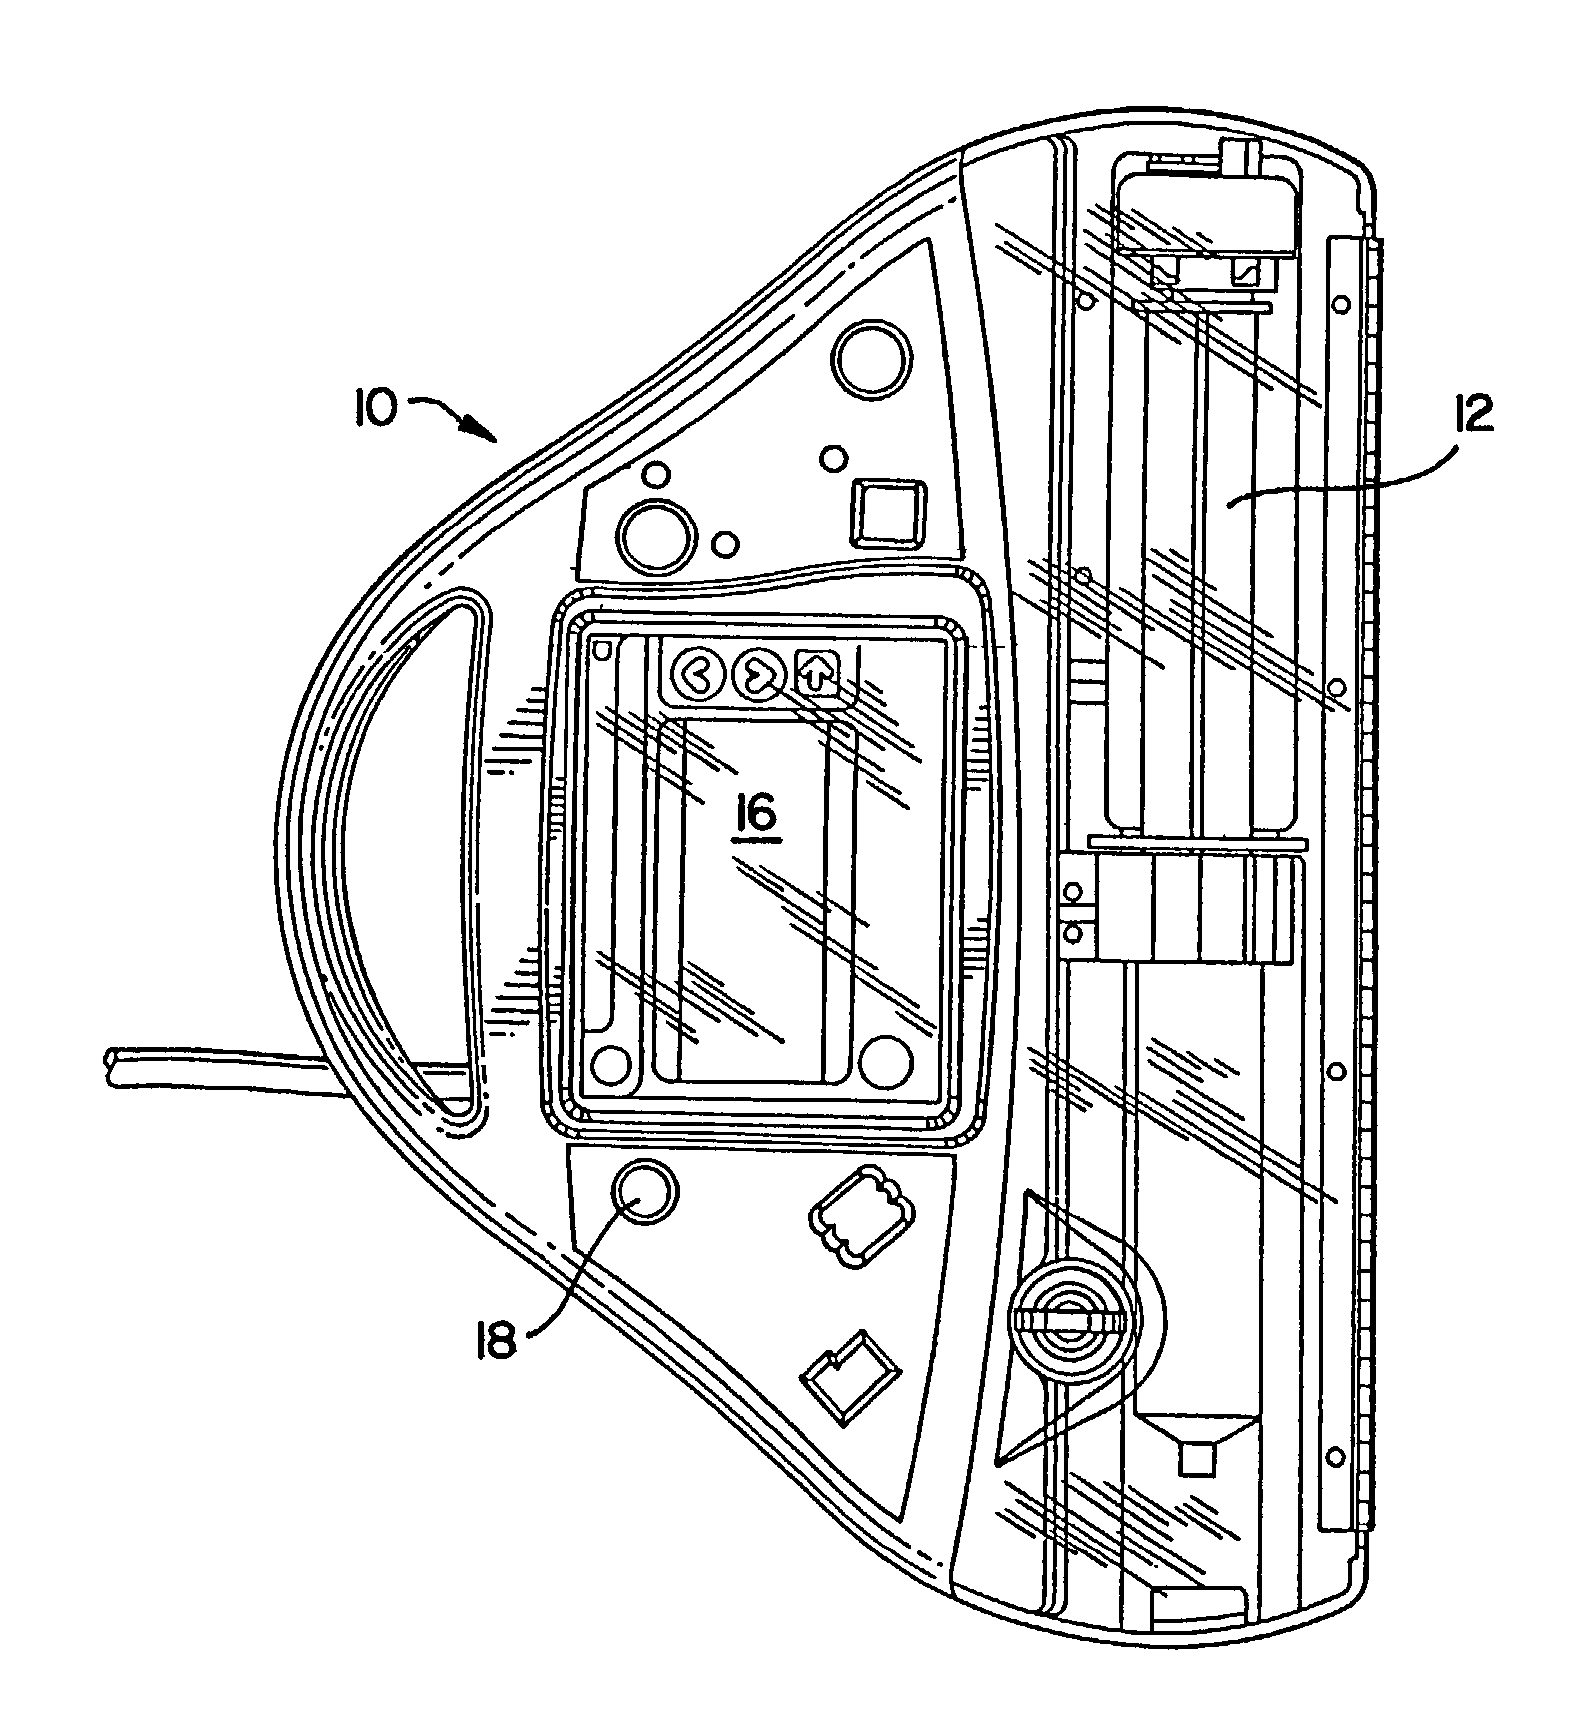 Dual orientation display for a medical device